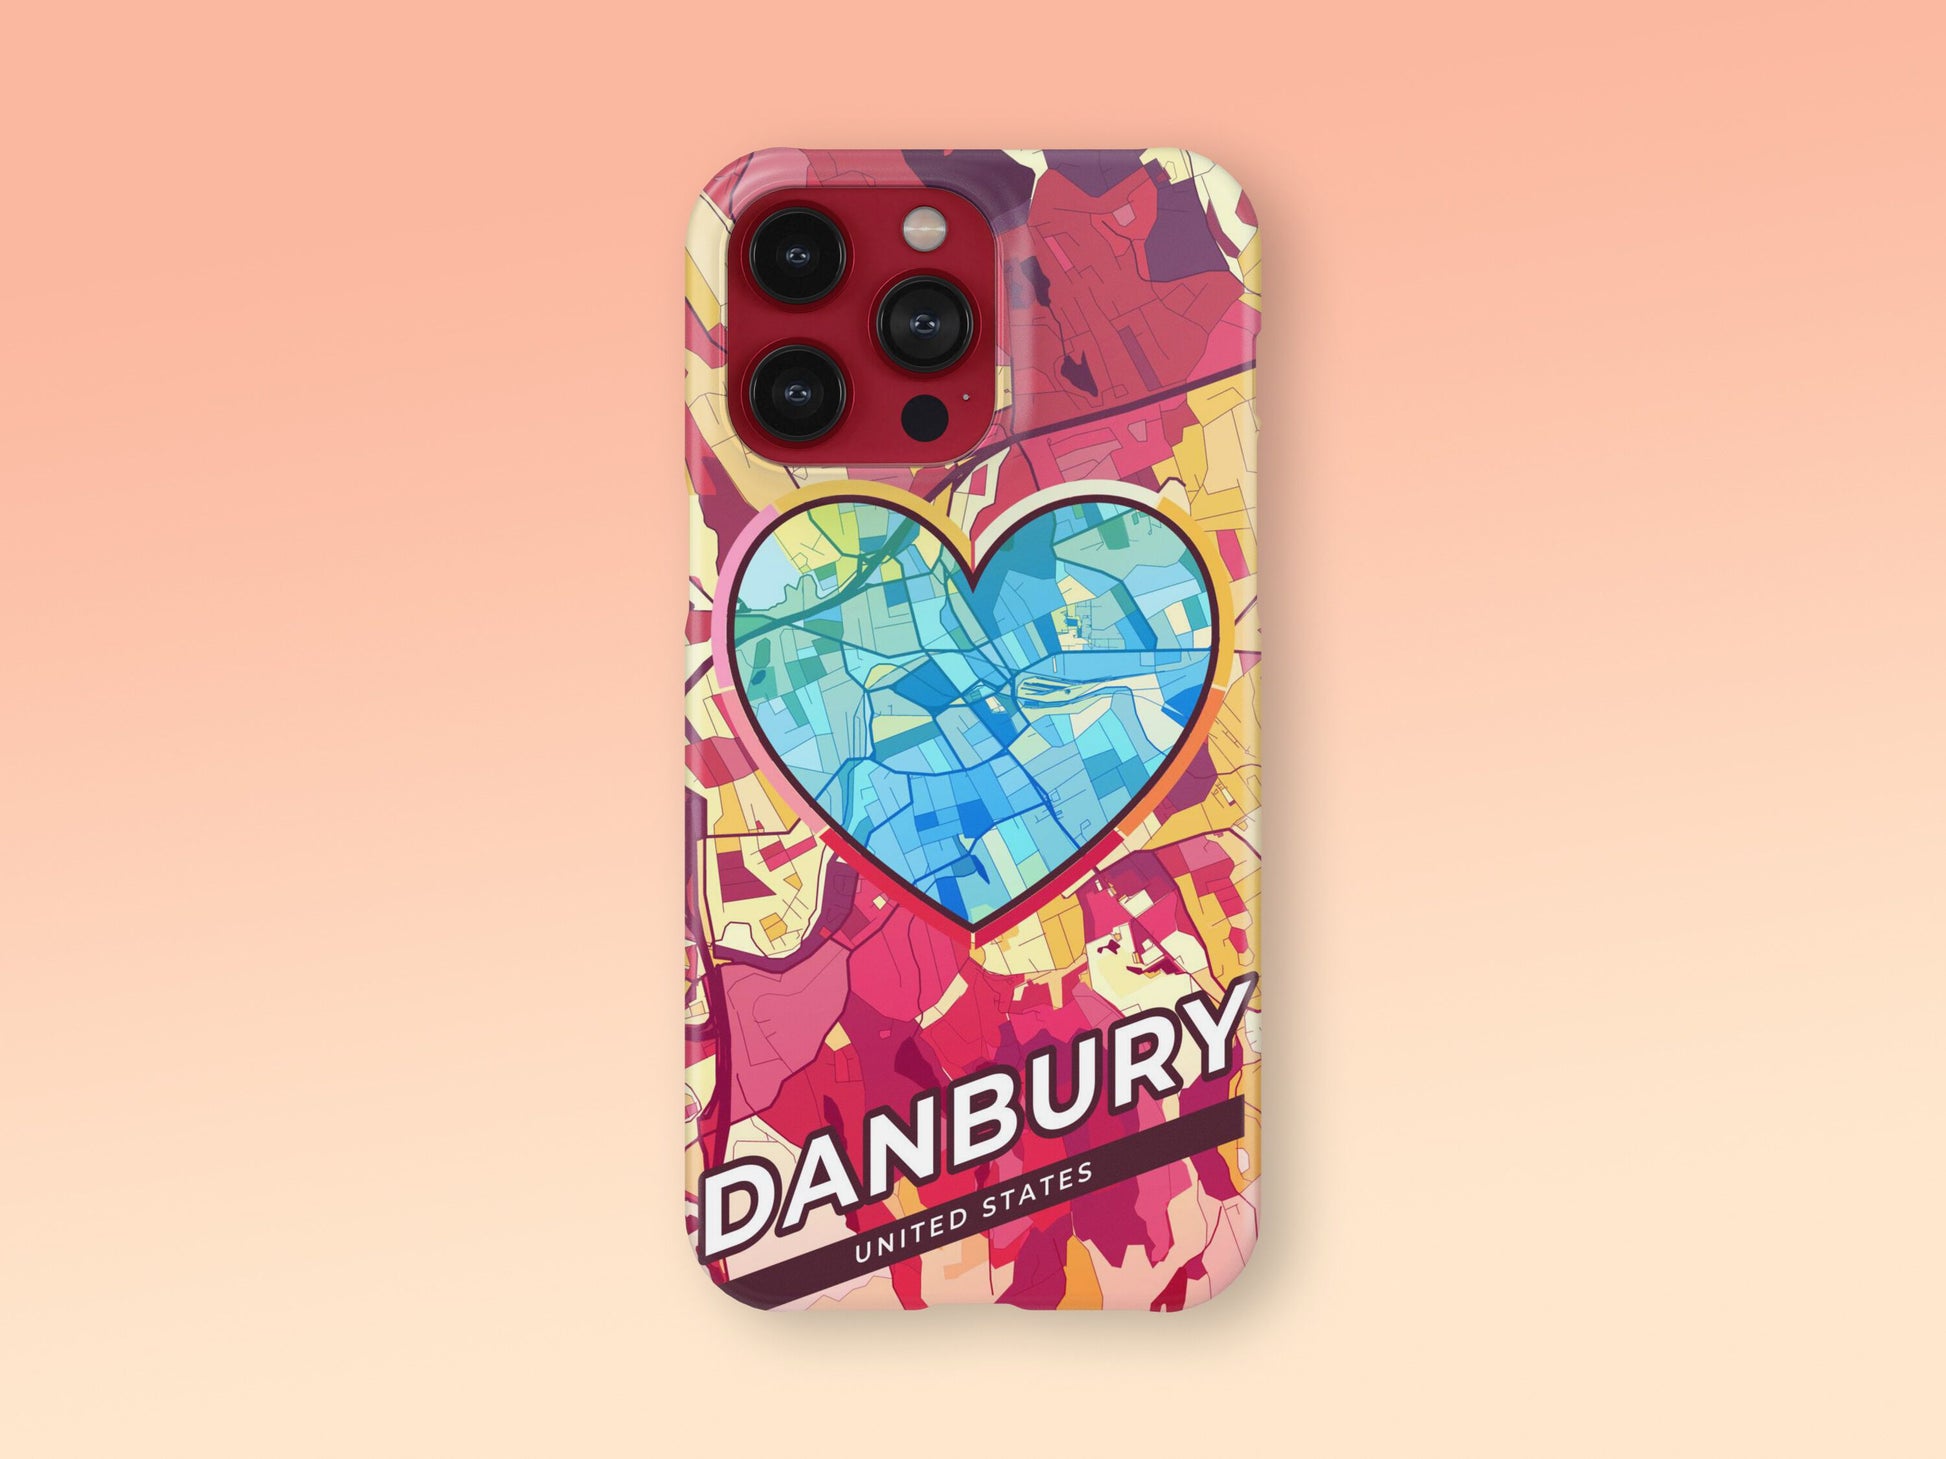 Danbury Connecticut slim phone case with colorful icon. Birthday, wedding or housewarming gift. Couple match cases. 2